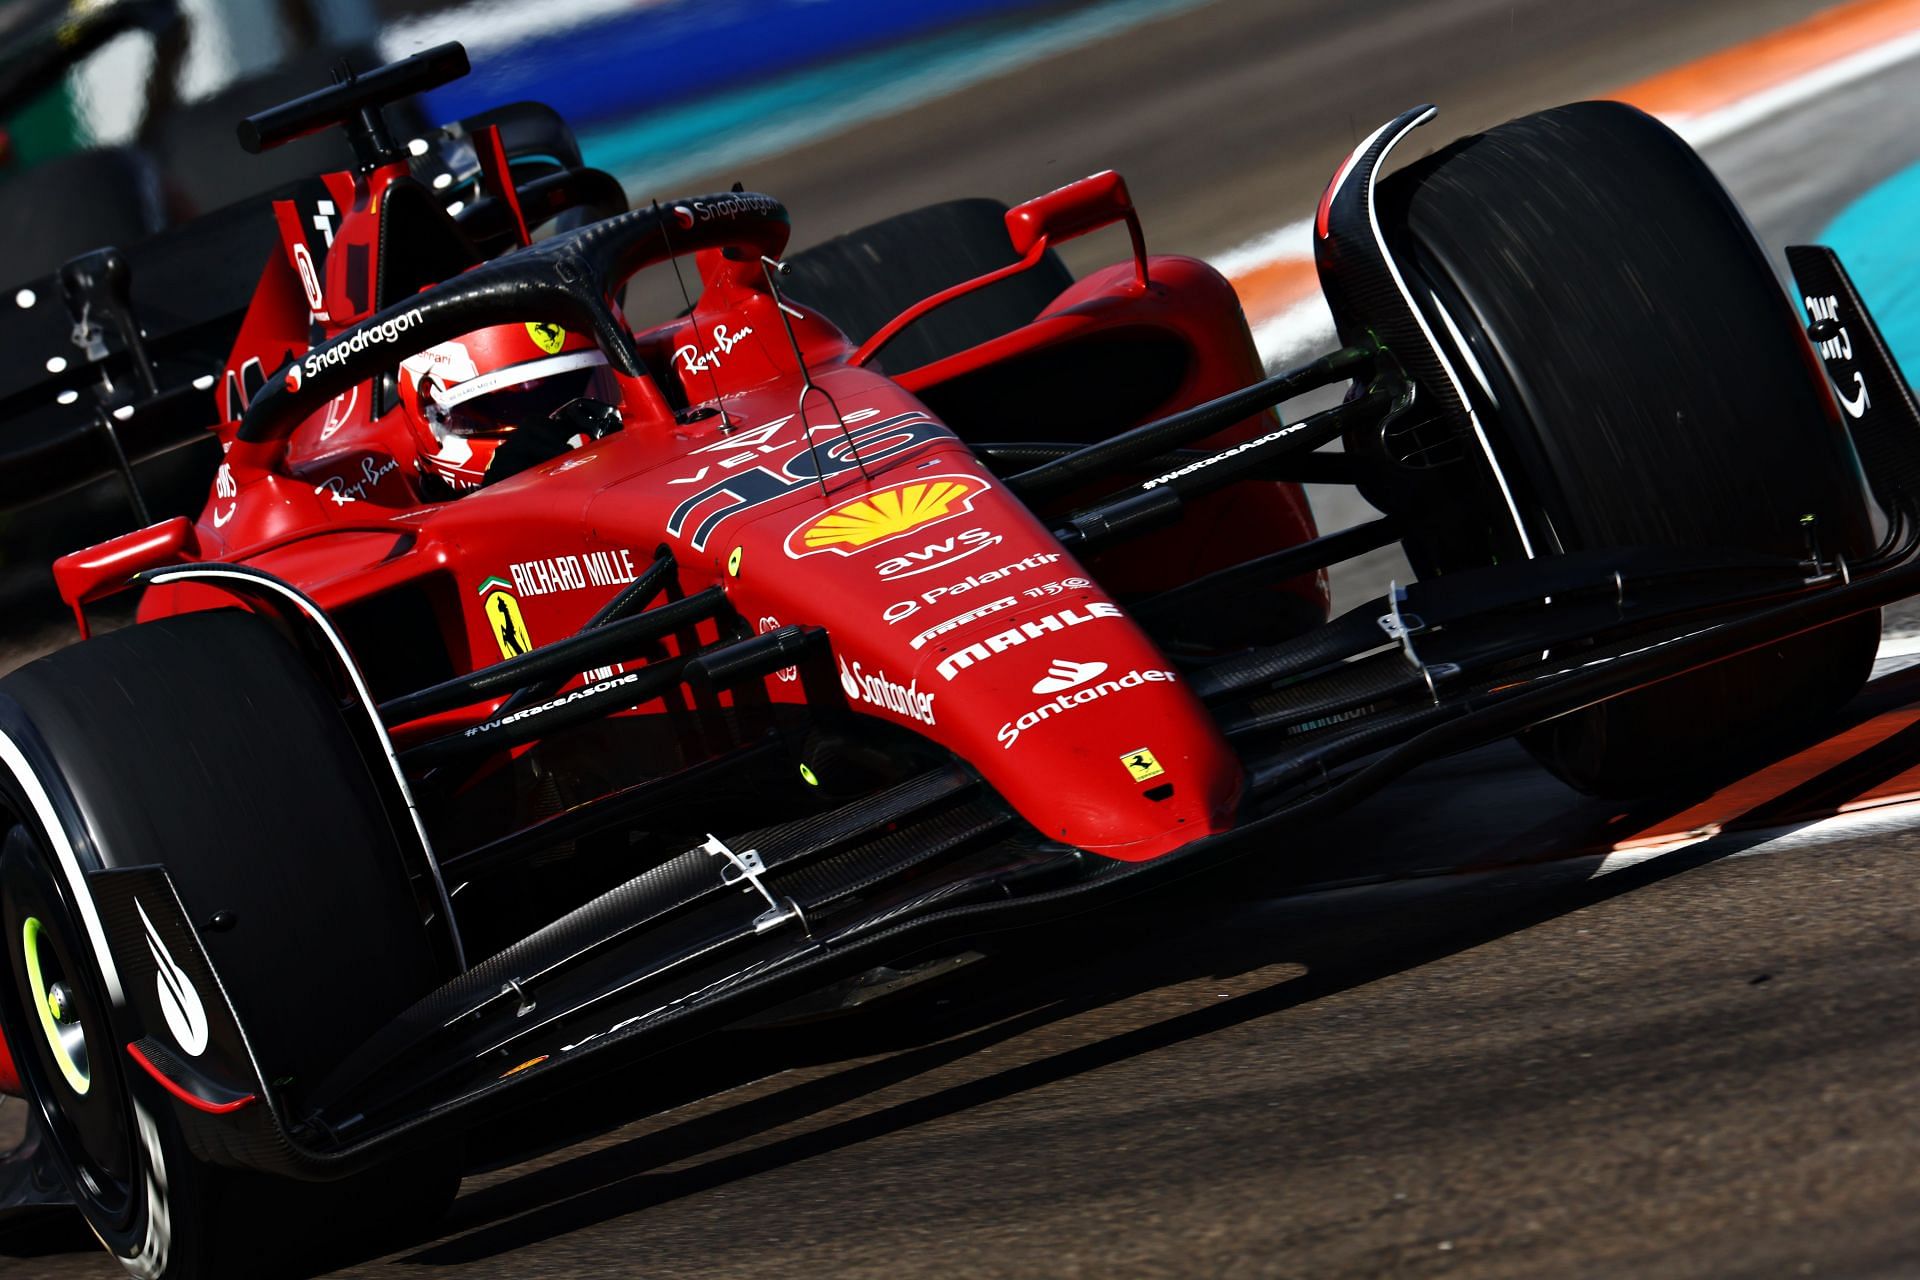 Ferrari is targeting a raft of upgrades for the 2022 Spanish GP aimed primarily at weight savings